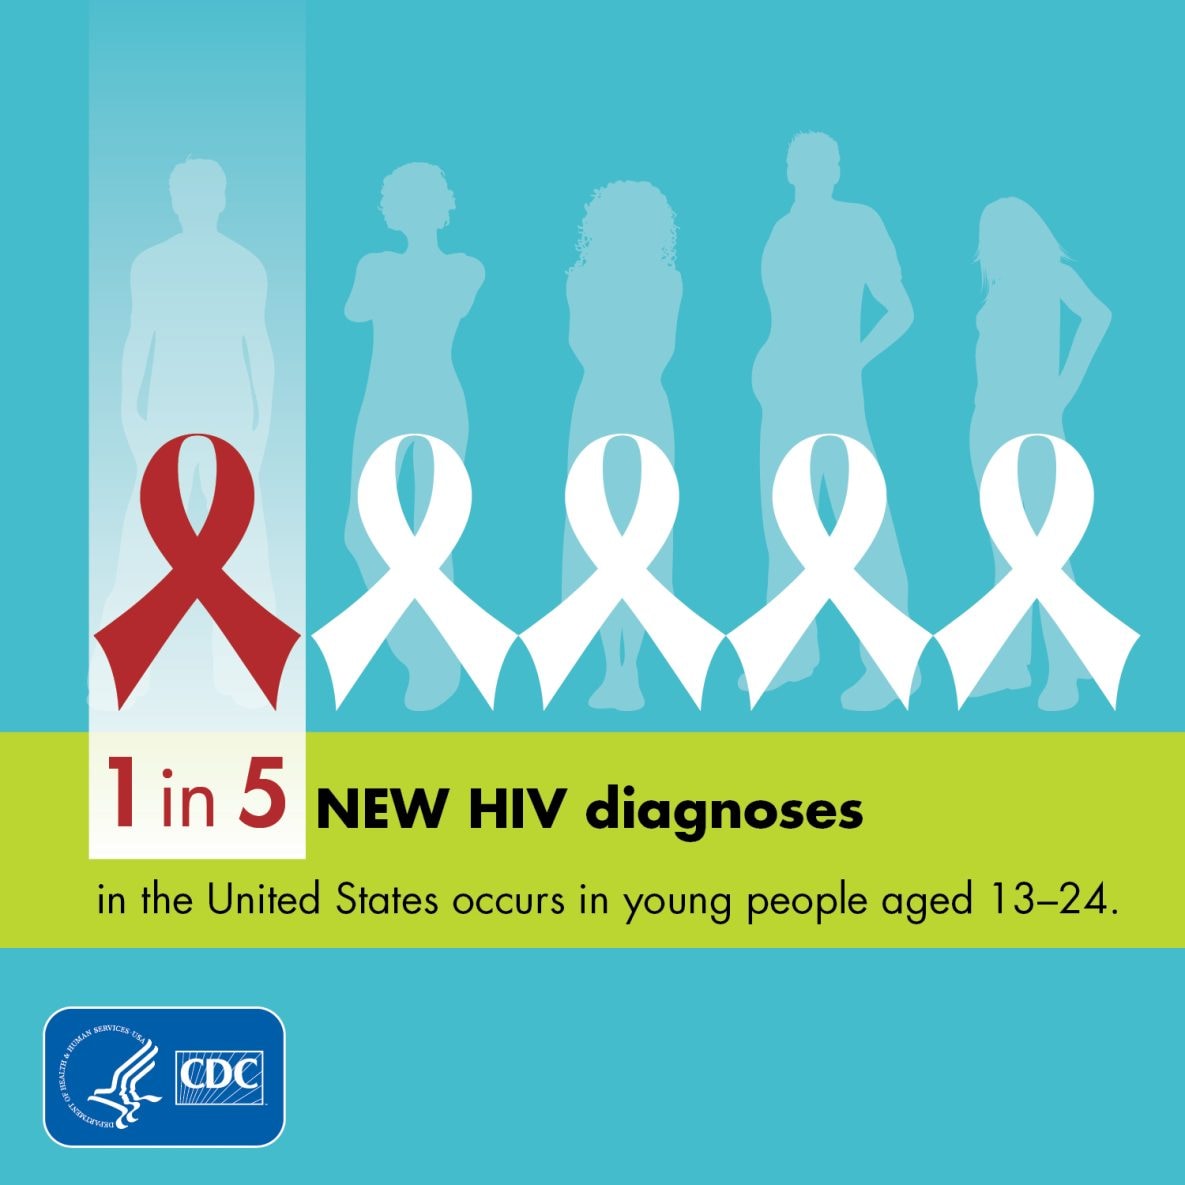 1 in 5 new HIV diagnoses in the U.S. occurs in young people aged 13-24.